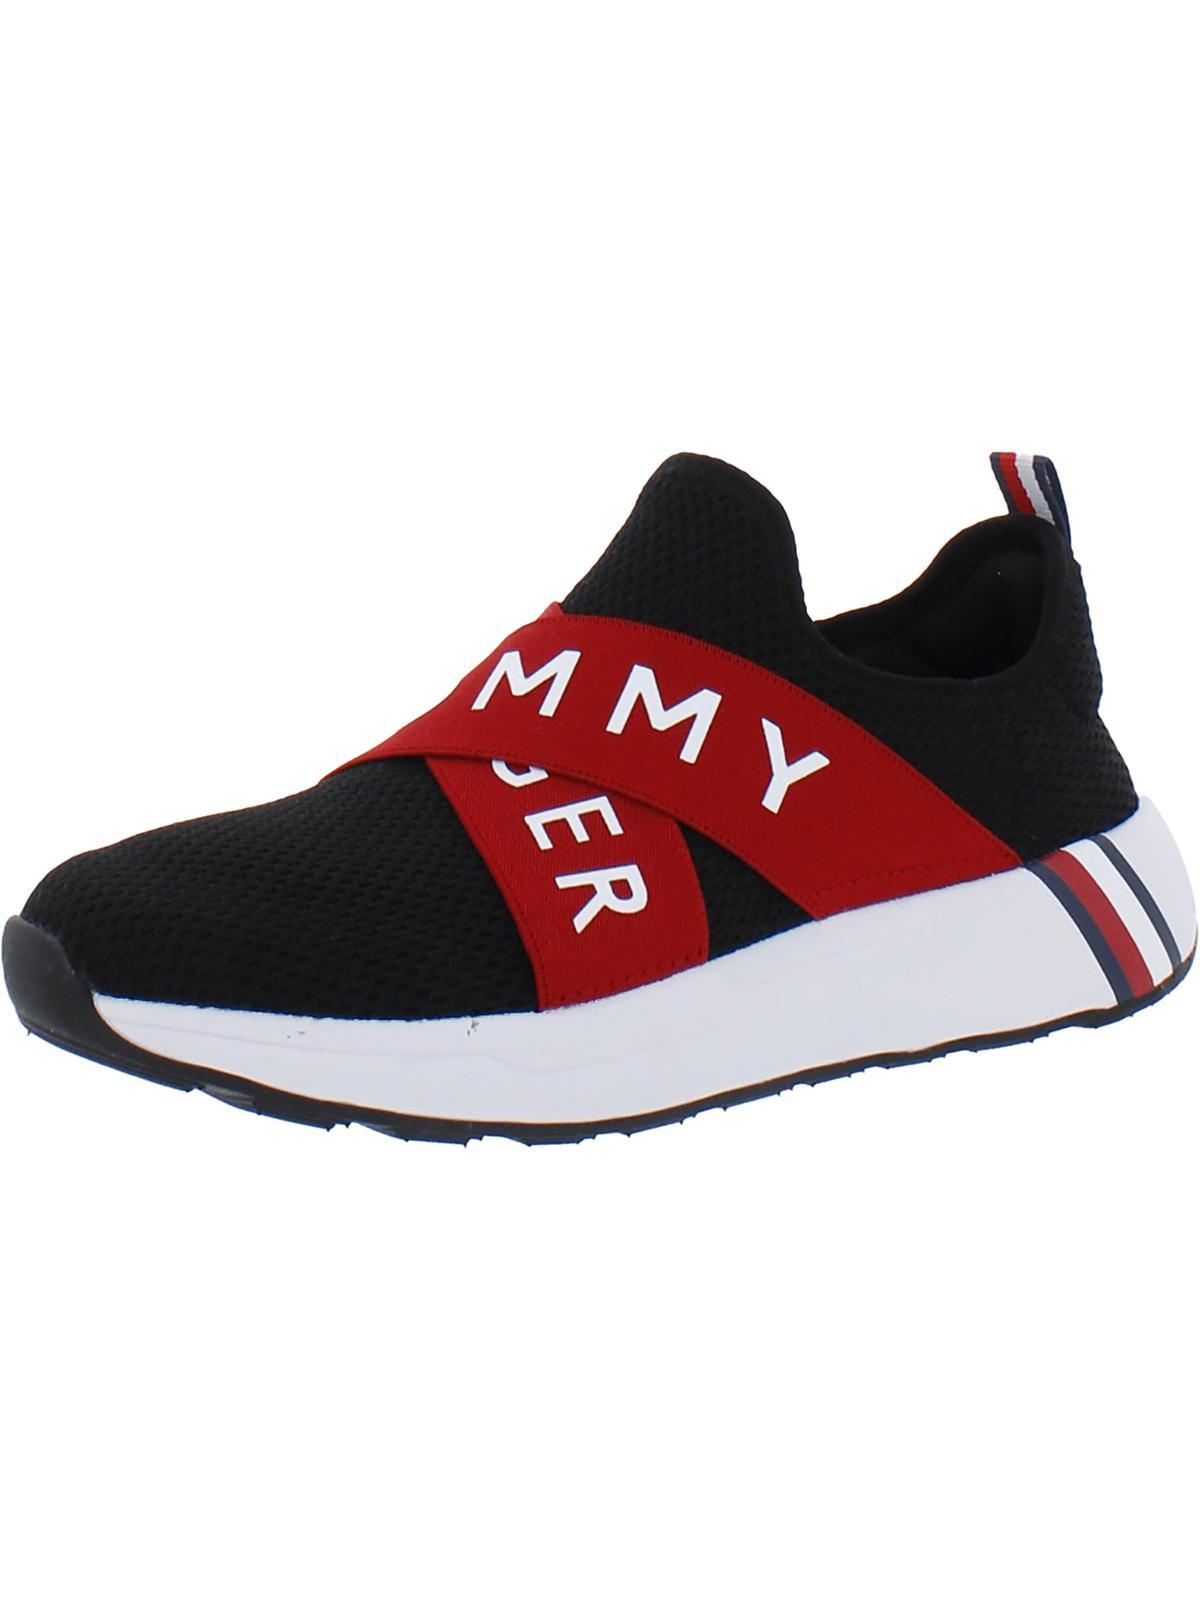 Tommy Hilfiger Amyna Trainer Fitness Slip-on Sneakers in Red | Lyst